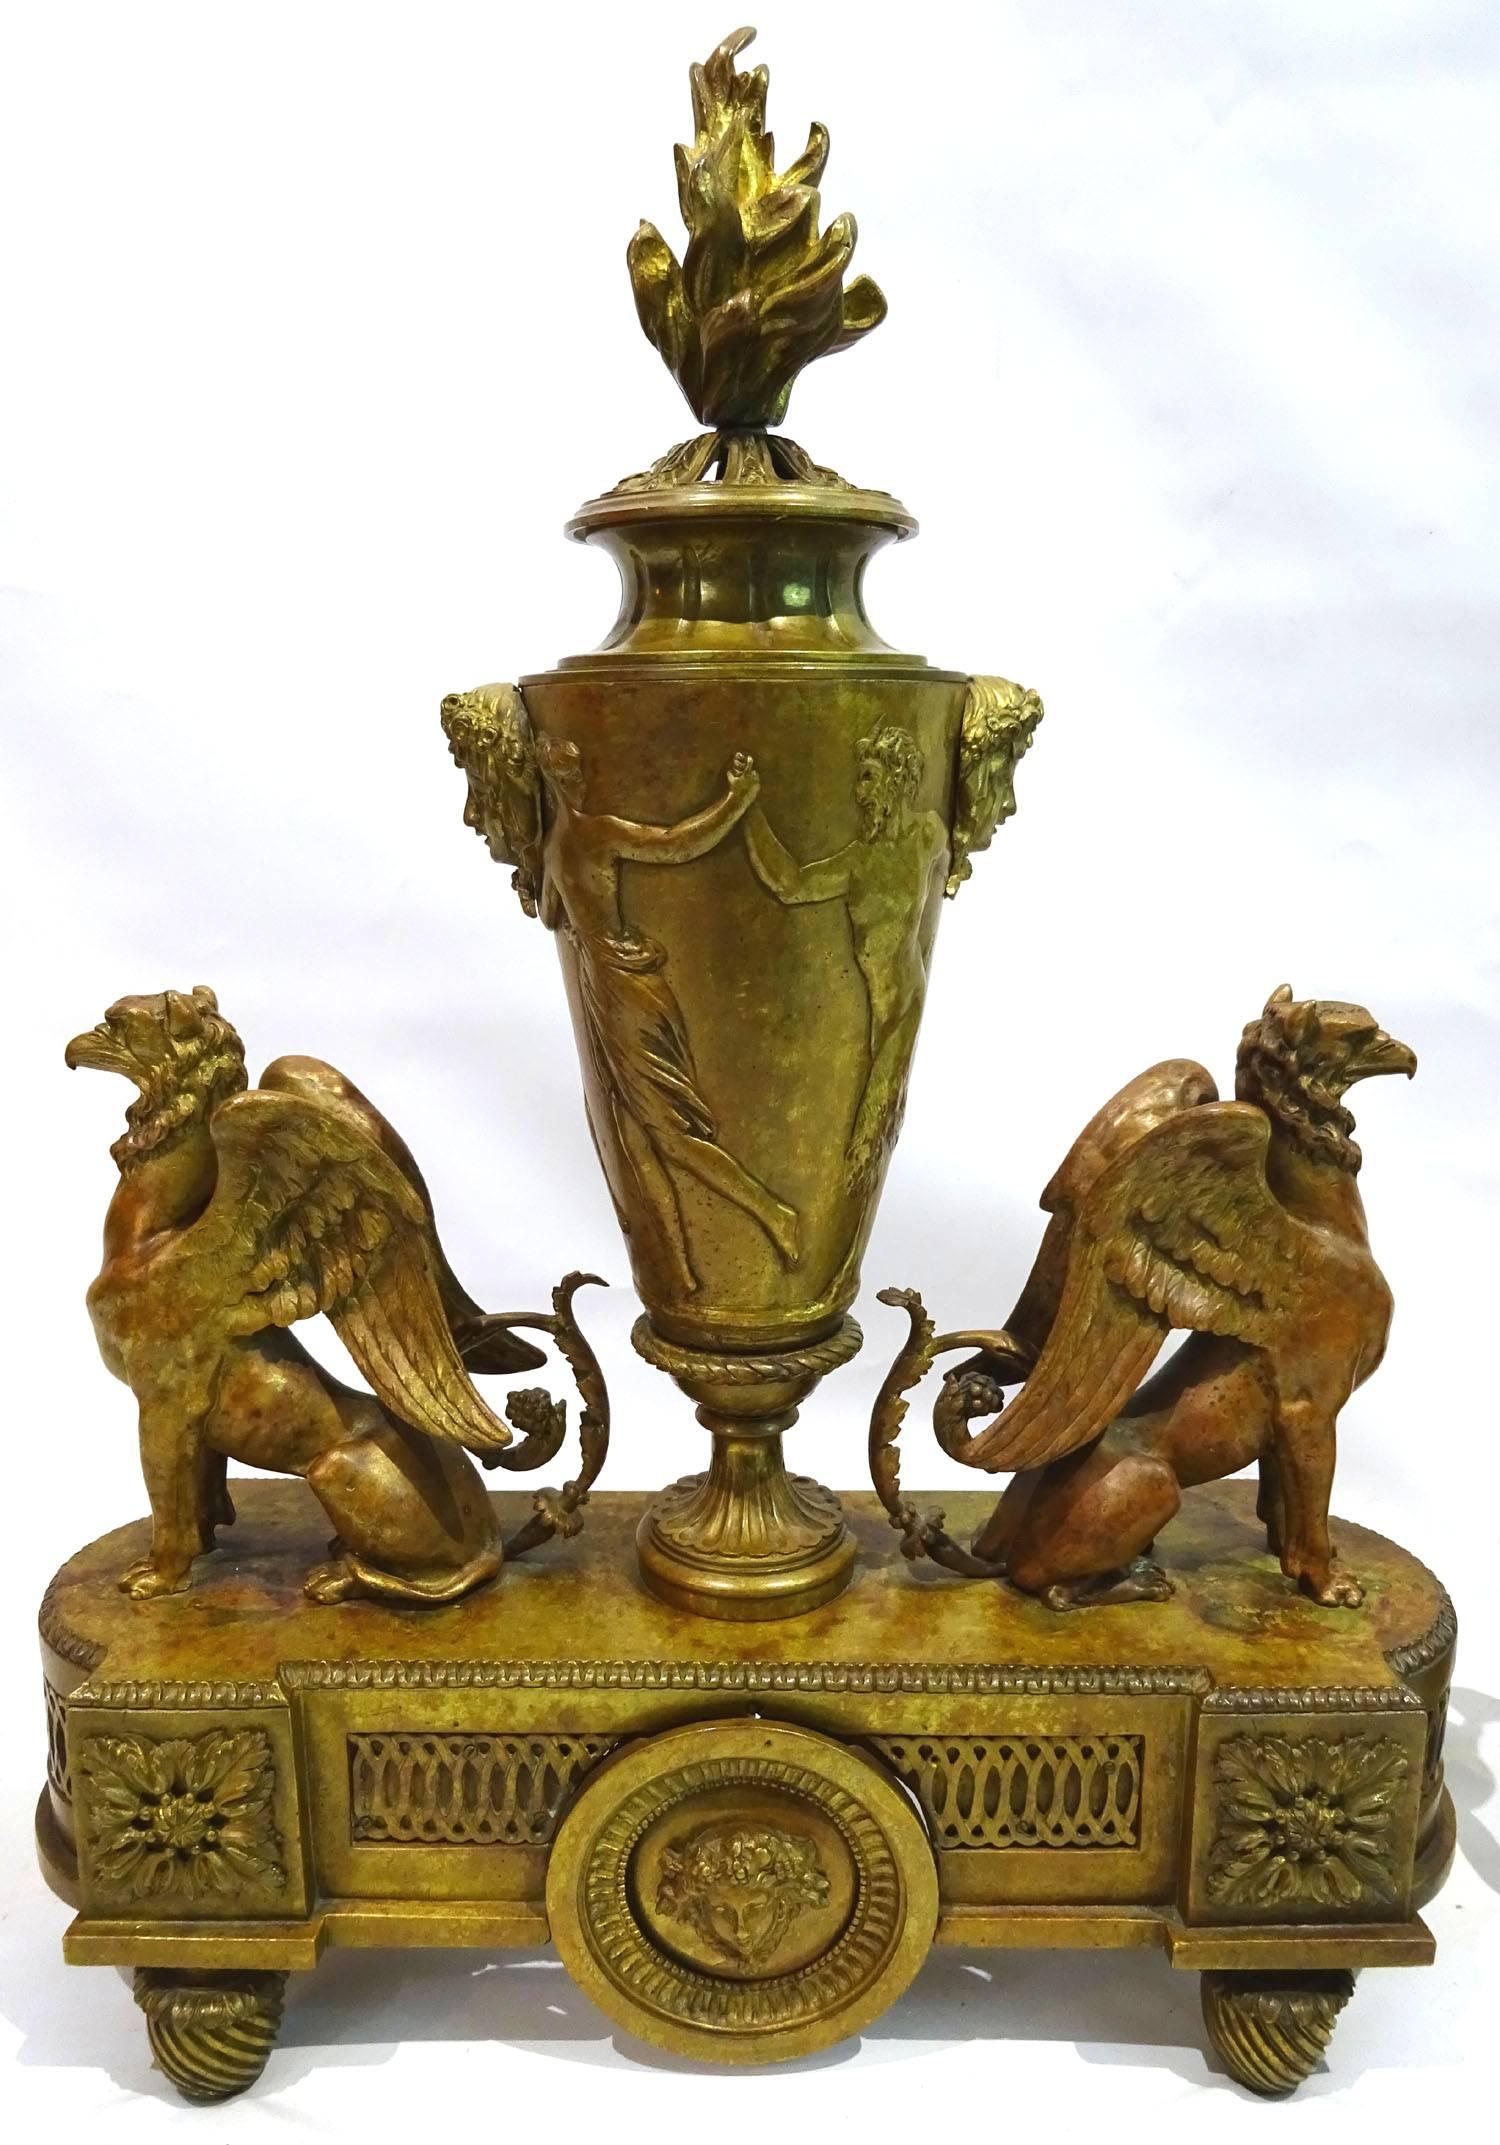 Pair of Louis XIV style bronze andirons attributed to Ferdinand Barbedienne (1810-1892), in a patinated finish, consisting of a centrally located upright urn with a relief of figures and masks under a carved flame finial, flanked by winged gryphons,